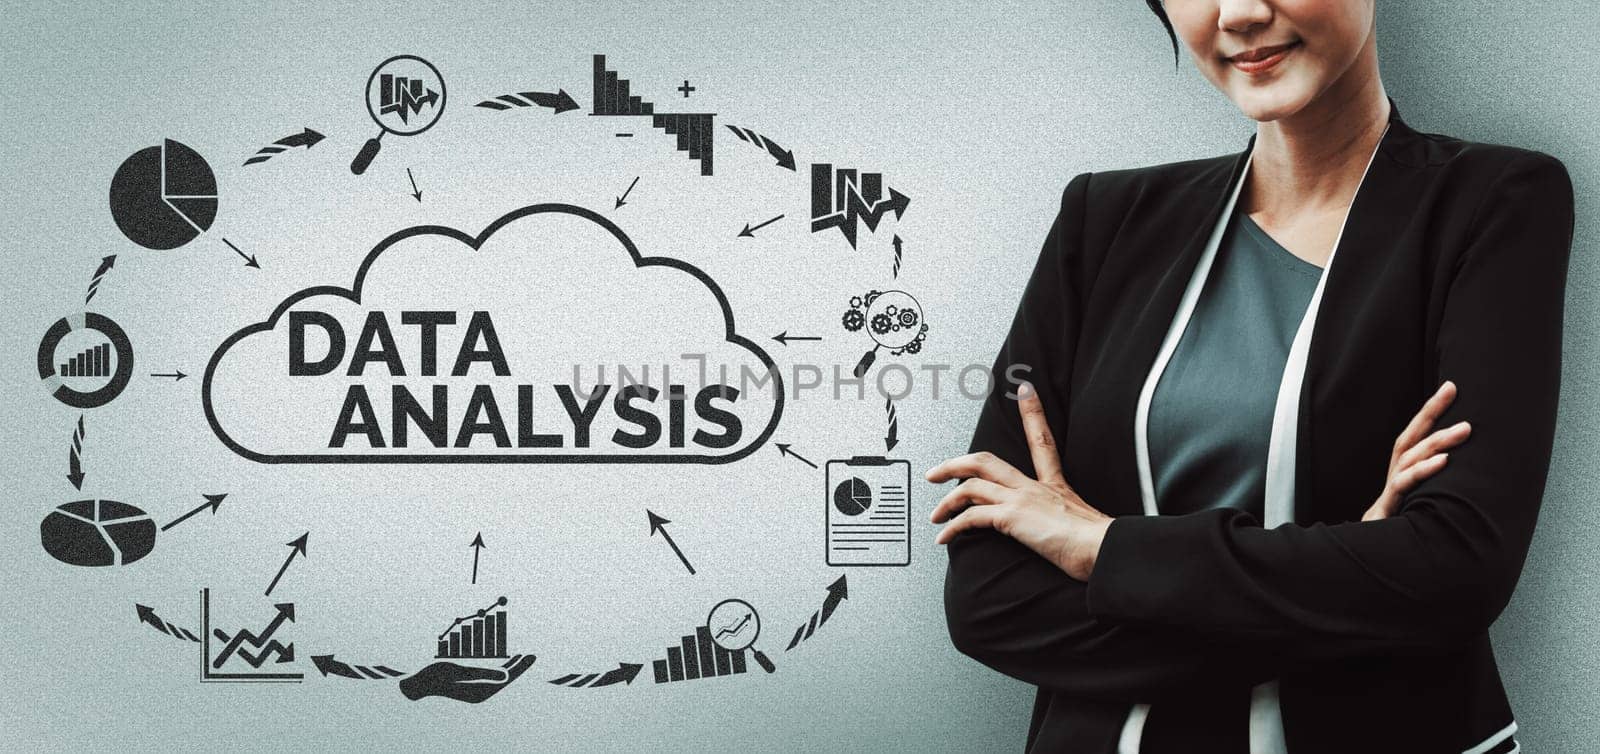 Data Analysis for Business and Finance Concept uds by biancoblue